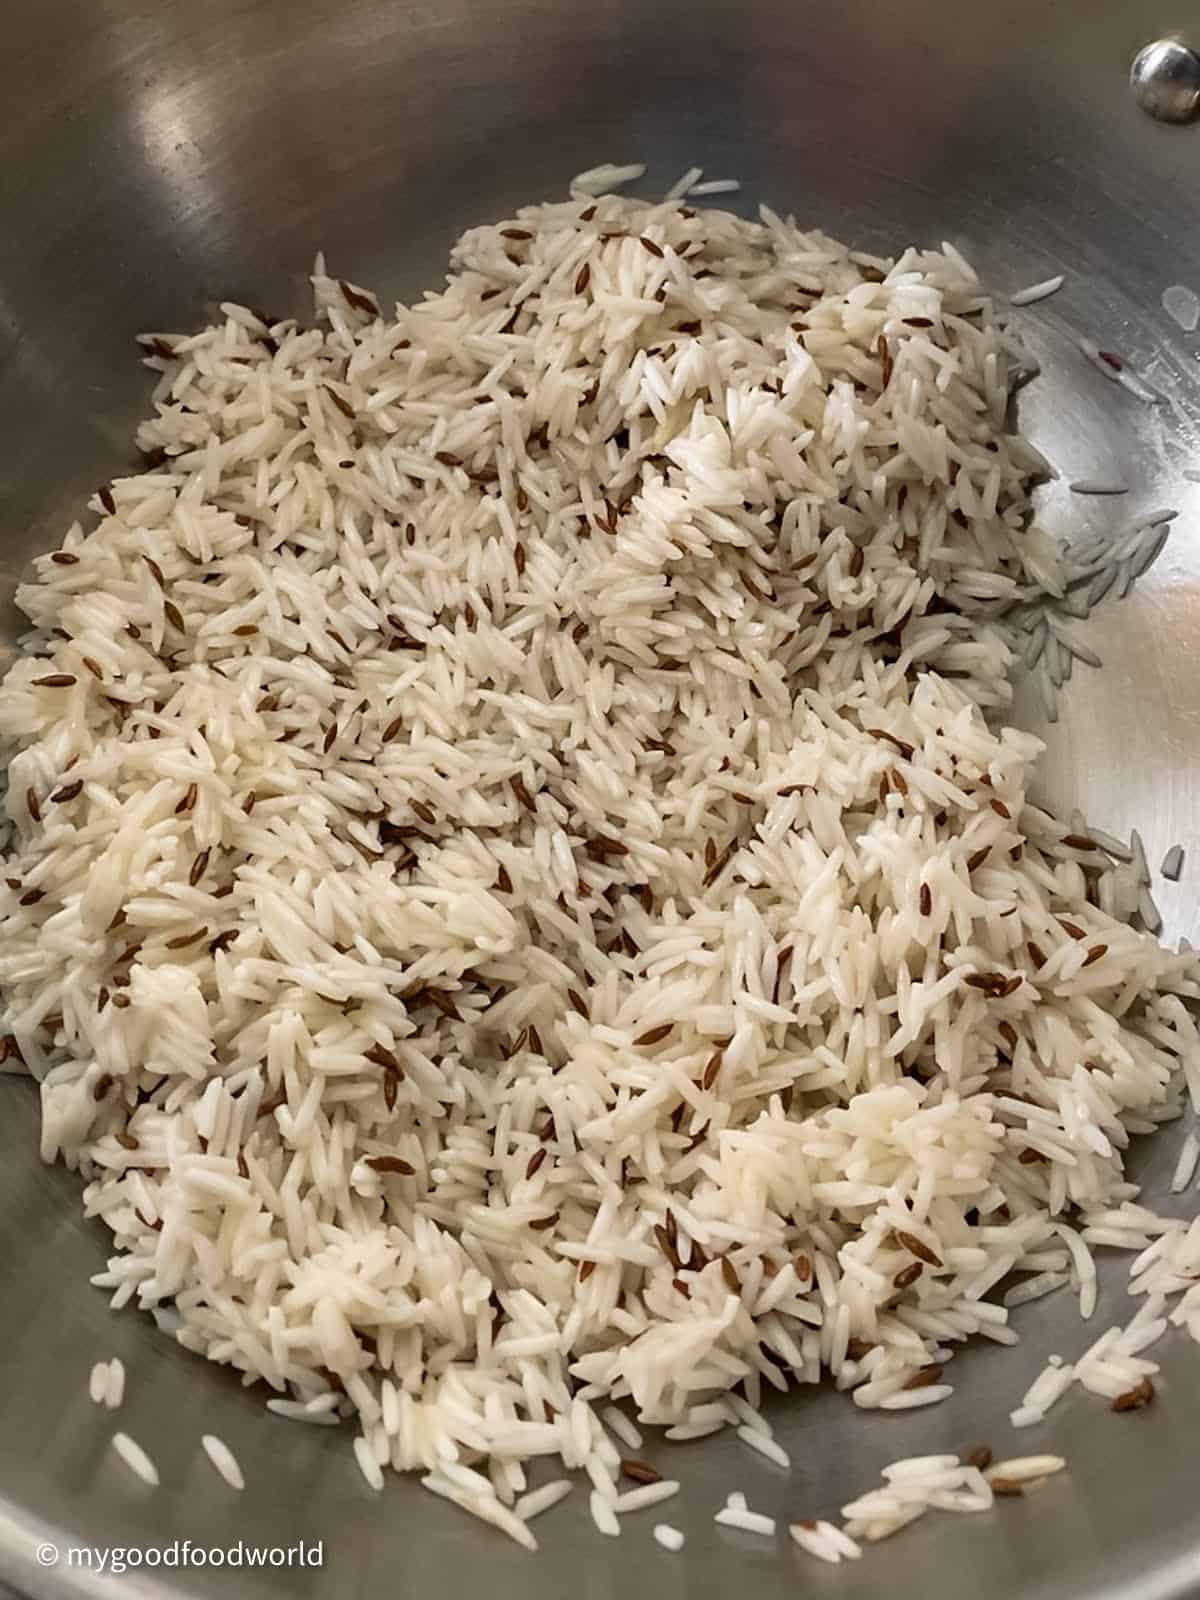 Basmati rice and whole cumin seeds are tossed together in a steel pan.